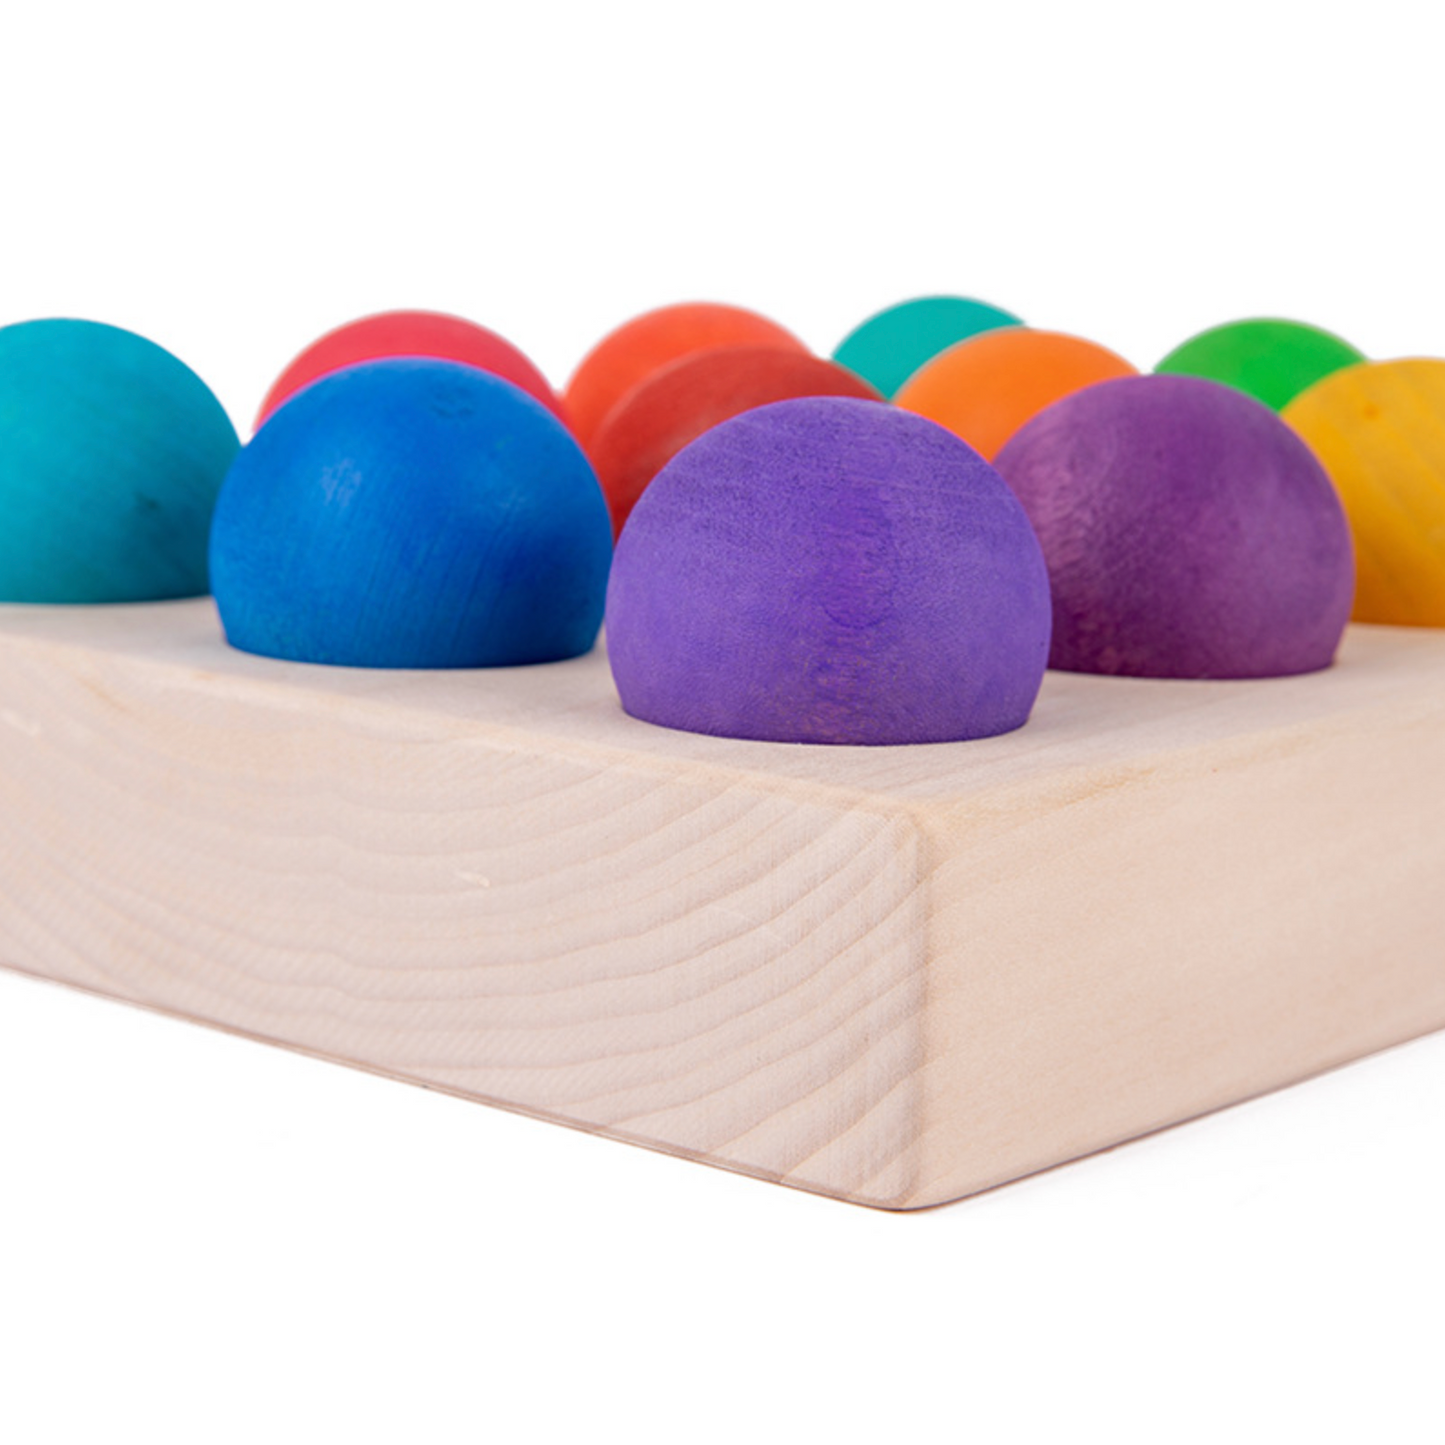 Prism Play 12 Pcs Rainbow Wooden Balls with Sorting Tray & Storage Bag